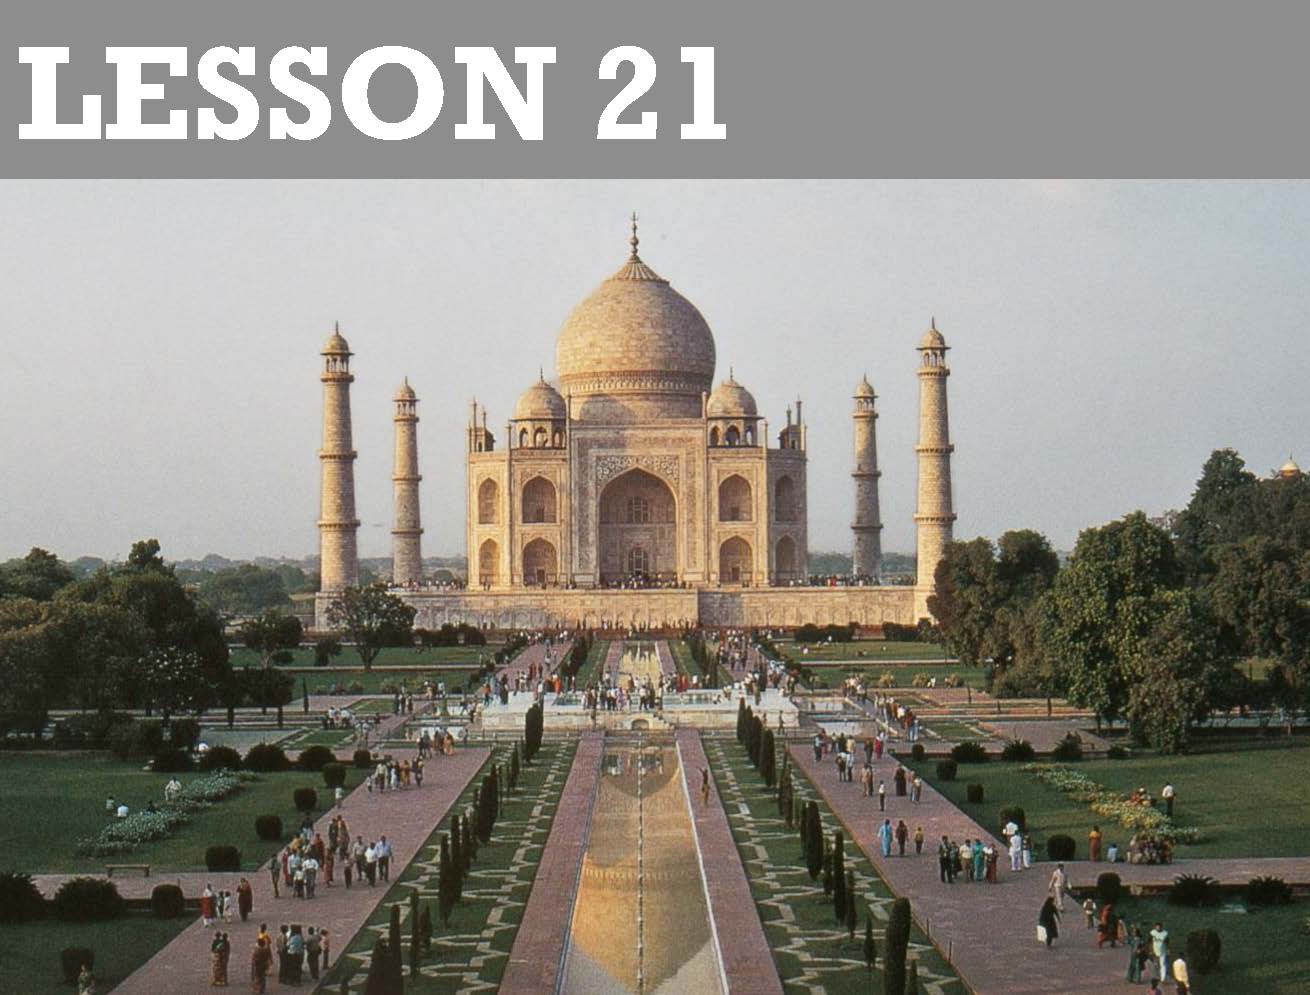 Taj Mahal Complex - <p>The twenty-first lesson in a 22 lesson course on Monuments of Islamic Architecture developed by Professors Gulru Necipoglu and David Roxburgh at the Aga Khan Program for Islamic Architecture at Harvard University. This lesson will uncover the multilayered meanings of the Taj Mahal, a major Mughal monument from the mid-seventeenth century, which has been understood, in general, as an expression of the undying love of the Mughal ruler Shah Jahan for his wife, the queen Mumtaz Mahal.</p><p></p><p></p><ul><li>What was the significance of the complex for the creation of a commercial quarter in the city?</li></ul><ul><li>In which ways did the complex gain paradisiac connotations?</li></ul><ul><li>What are the roles of the usage of the chahar bagh garden type, the hasht bihisht plan type, and specific materials and decorative motifs in producing such architectural meanings and symbolism?&nbsp;&nbsp;</li></ul><br><br><p></p><p></p><div><br></div><p></p>